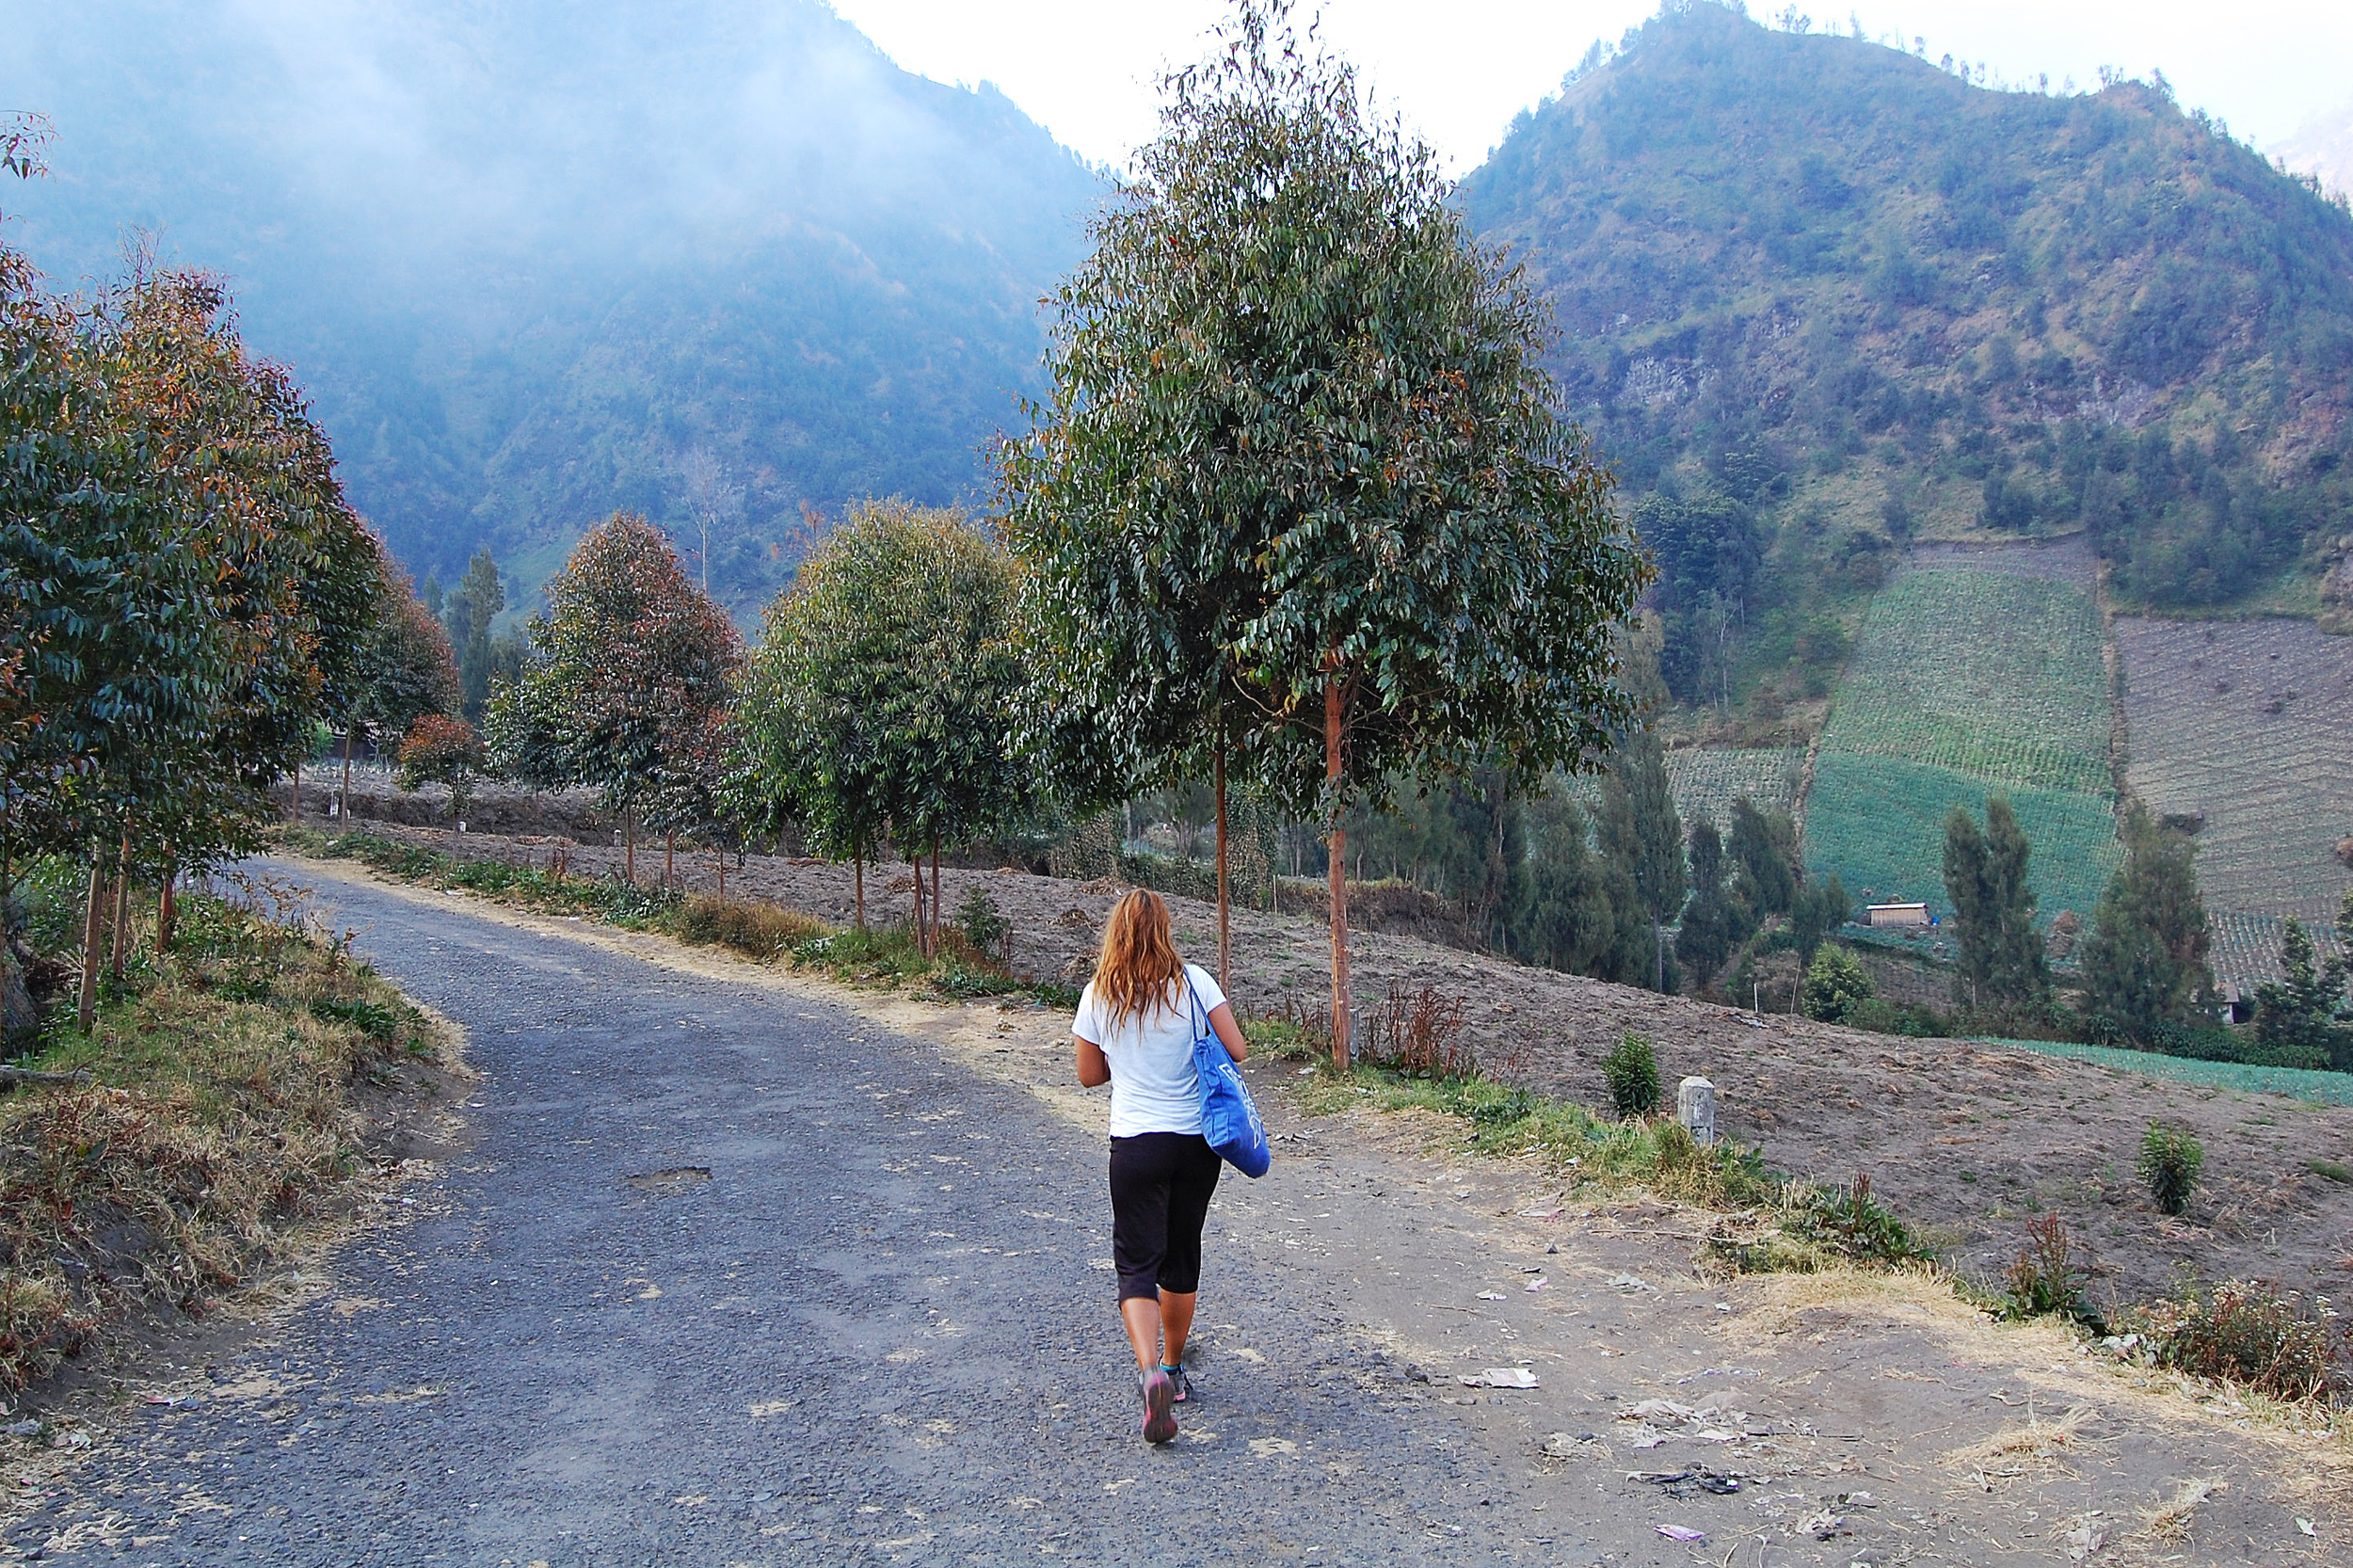 A woman walking down a road on the mountain